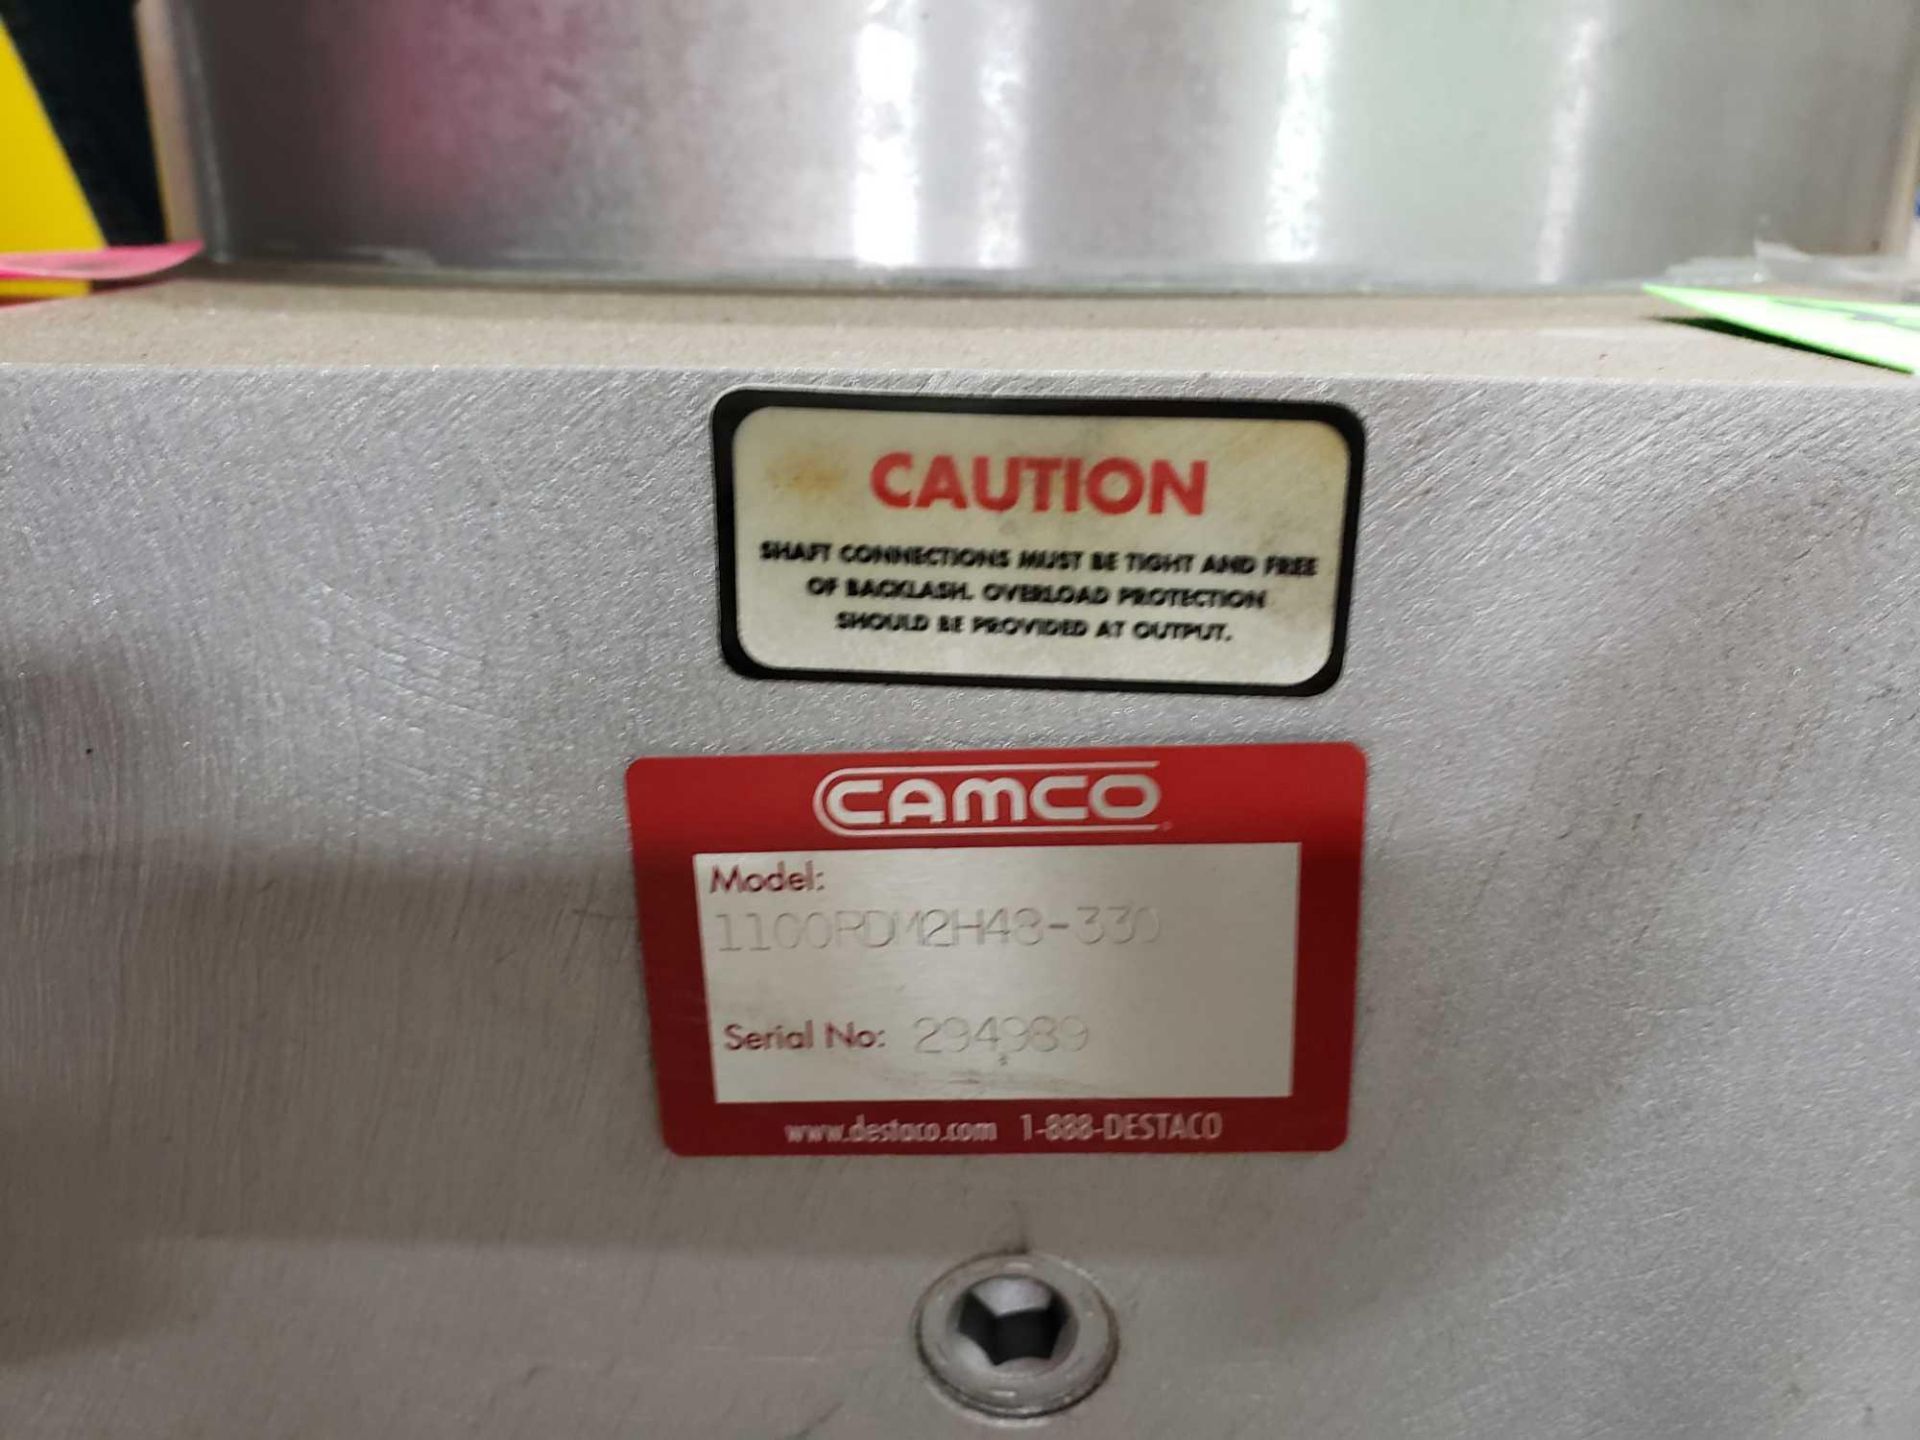 Camco model 1100RDM2H48-330 rotary positioner. New on pallet with paperwork. - Image 2 of 5